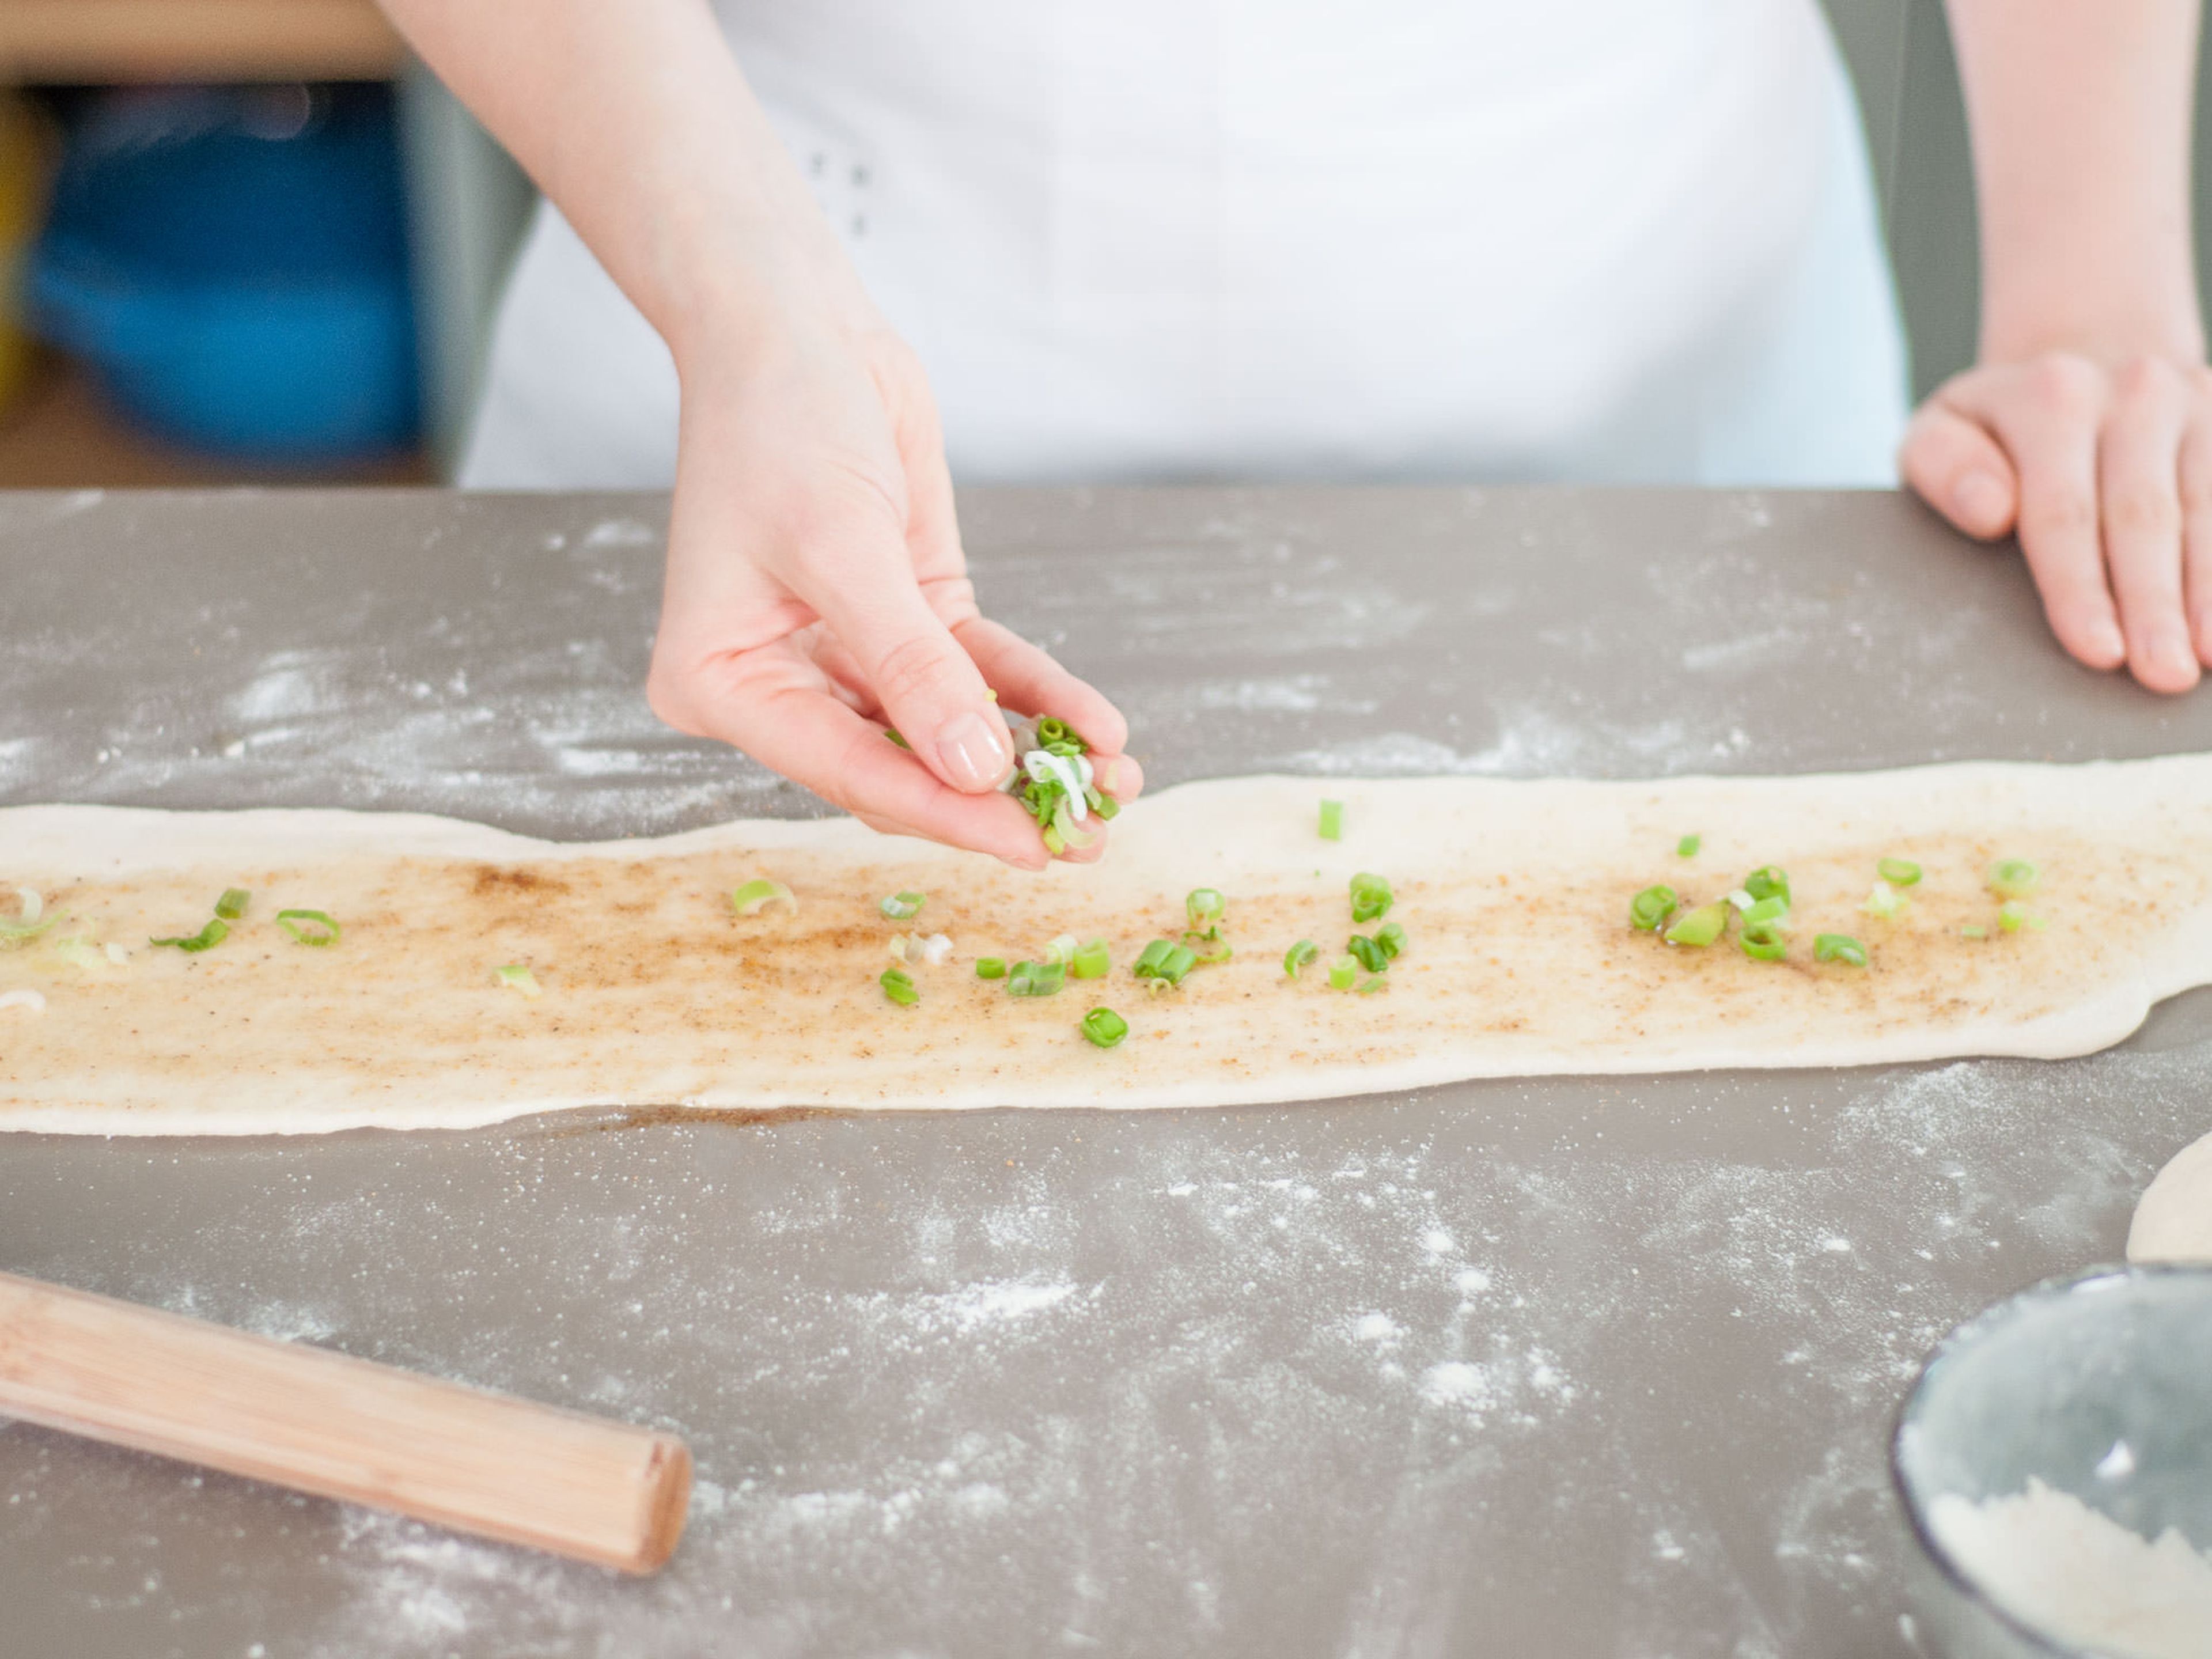 Divide dough in half and flour a work surface. Roll each piece of dough into a long, thin strip and coat with a small spoonful of scallion-infused oil, five spice powder, and salt. Sprinkle remaining chopped scallions on top, reserving some for garnishing.